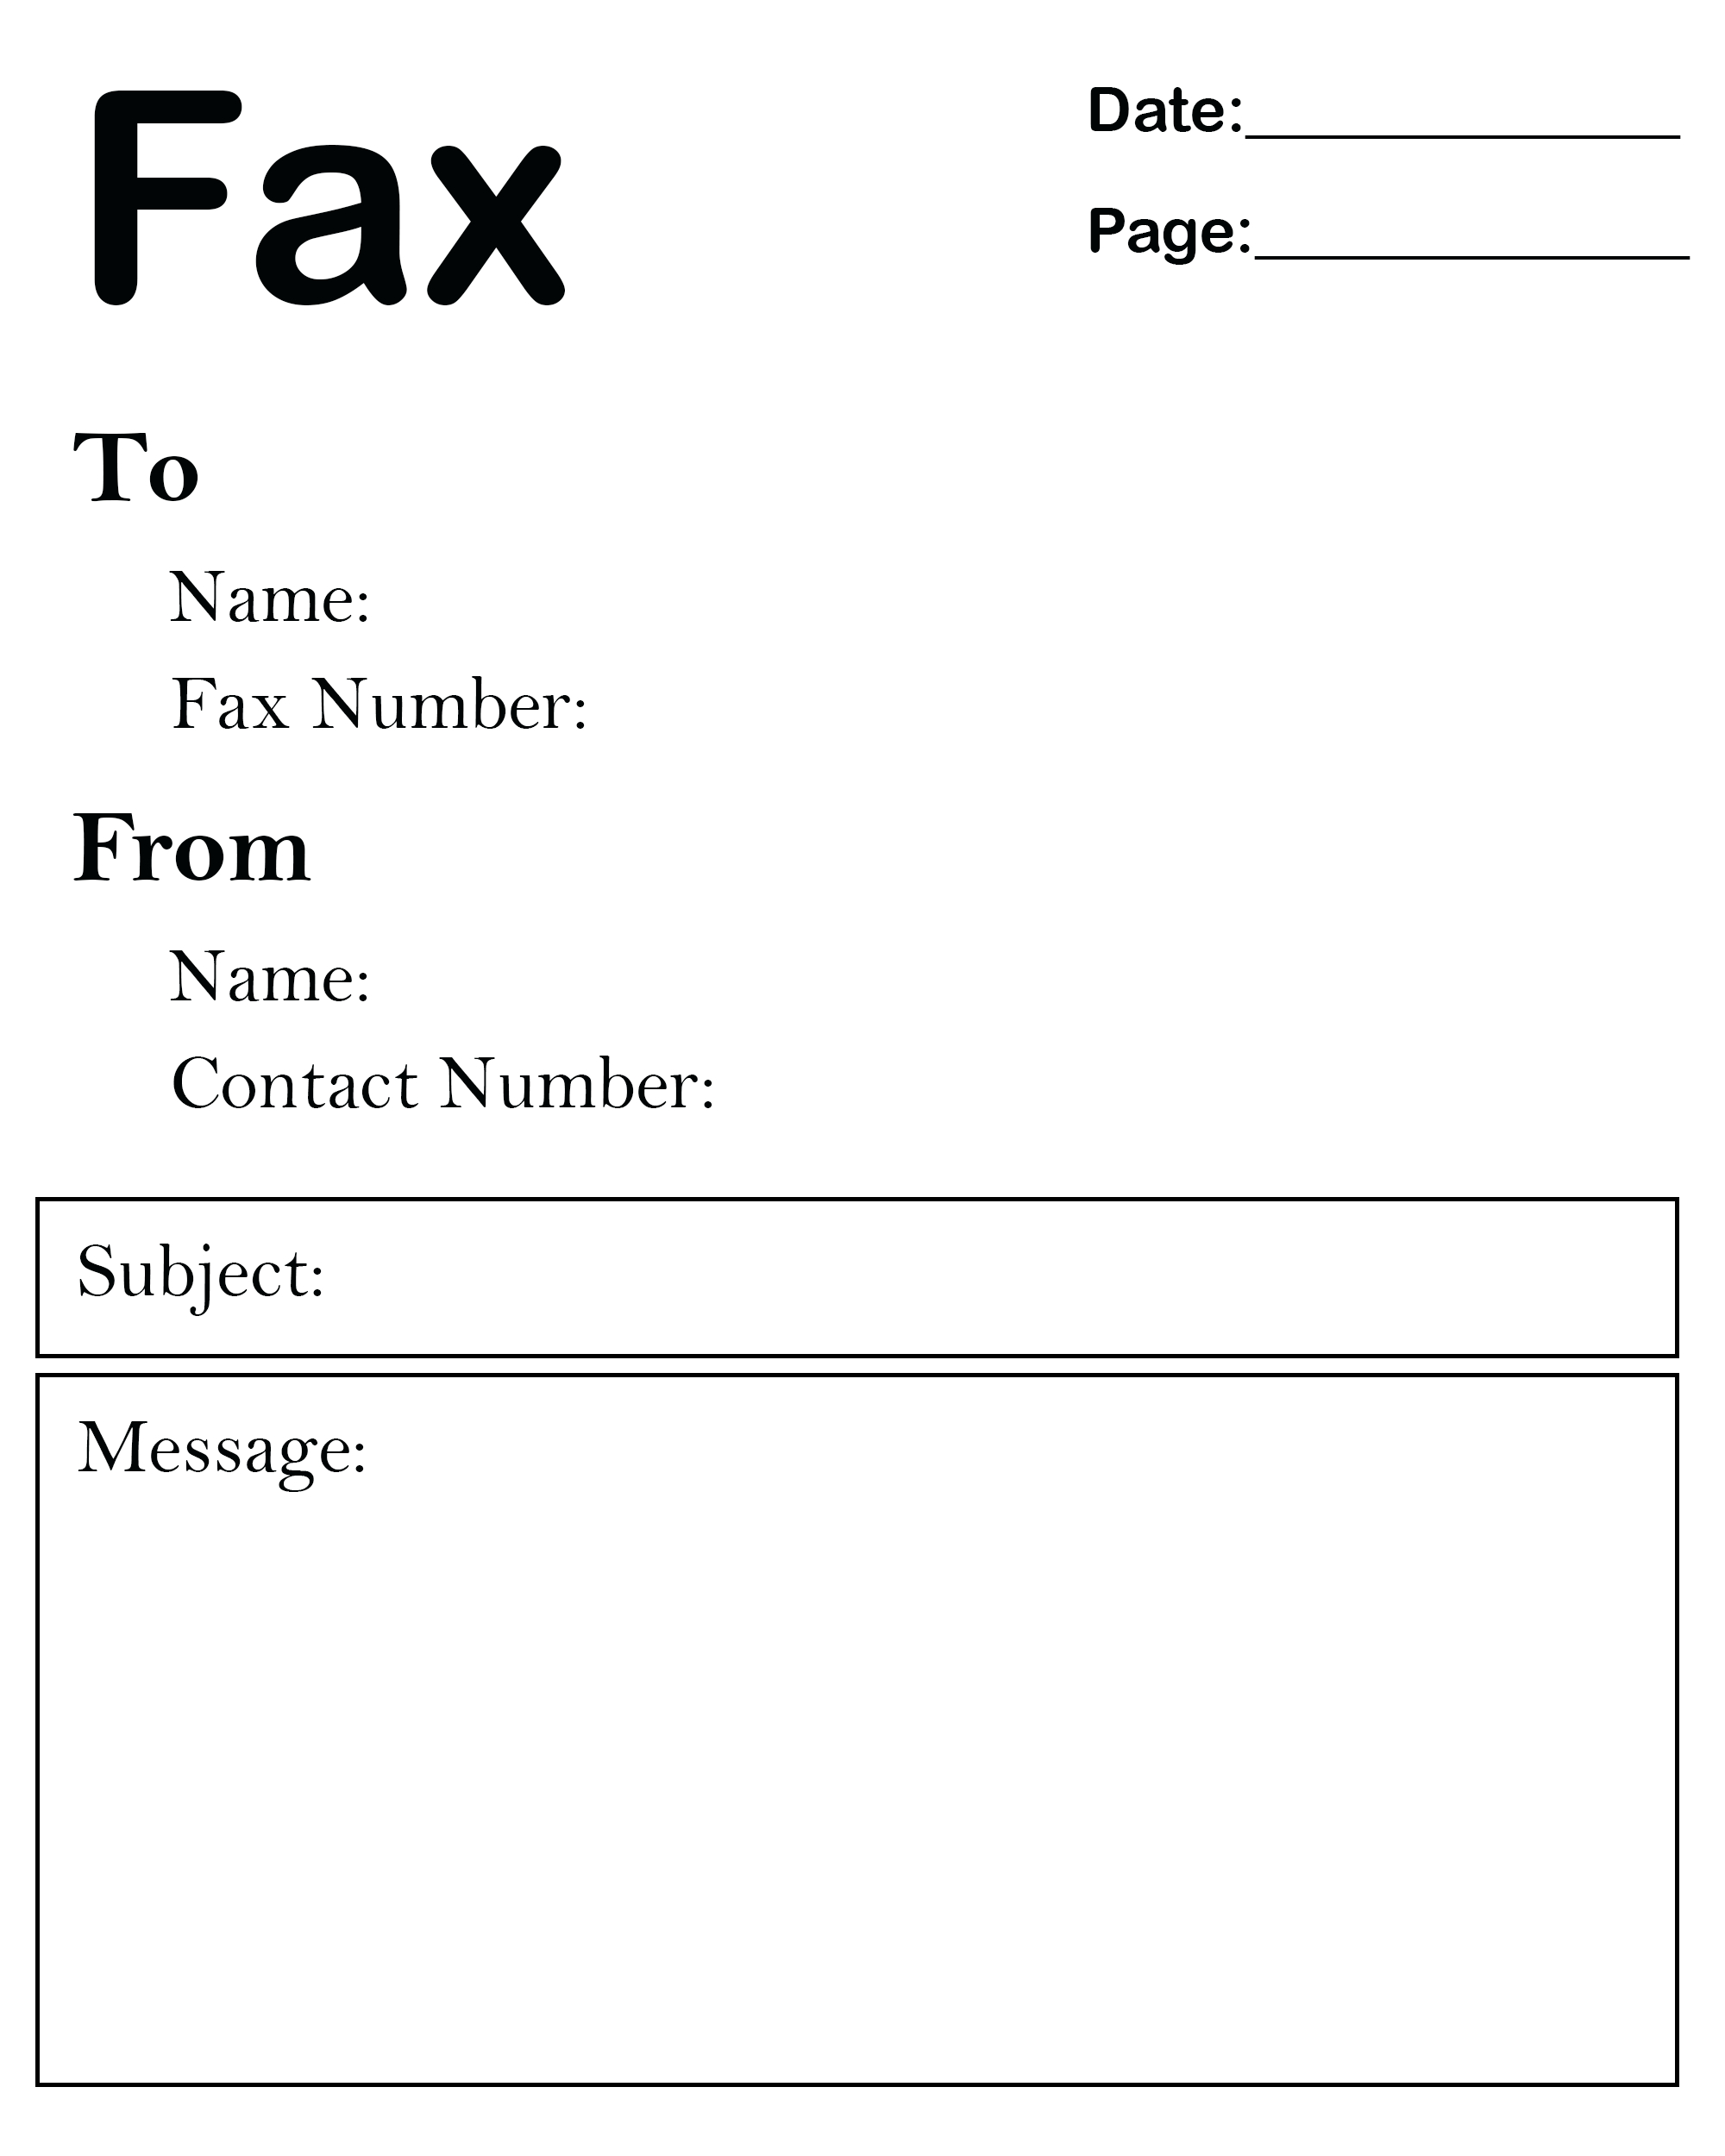 How To Use Online Fax Cover Sheet In Google Docs | How To Wiki Pertaining To Fax Cover Sheet Template Word 2010